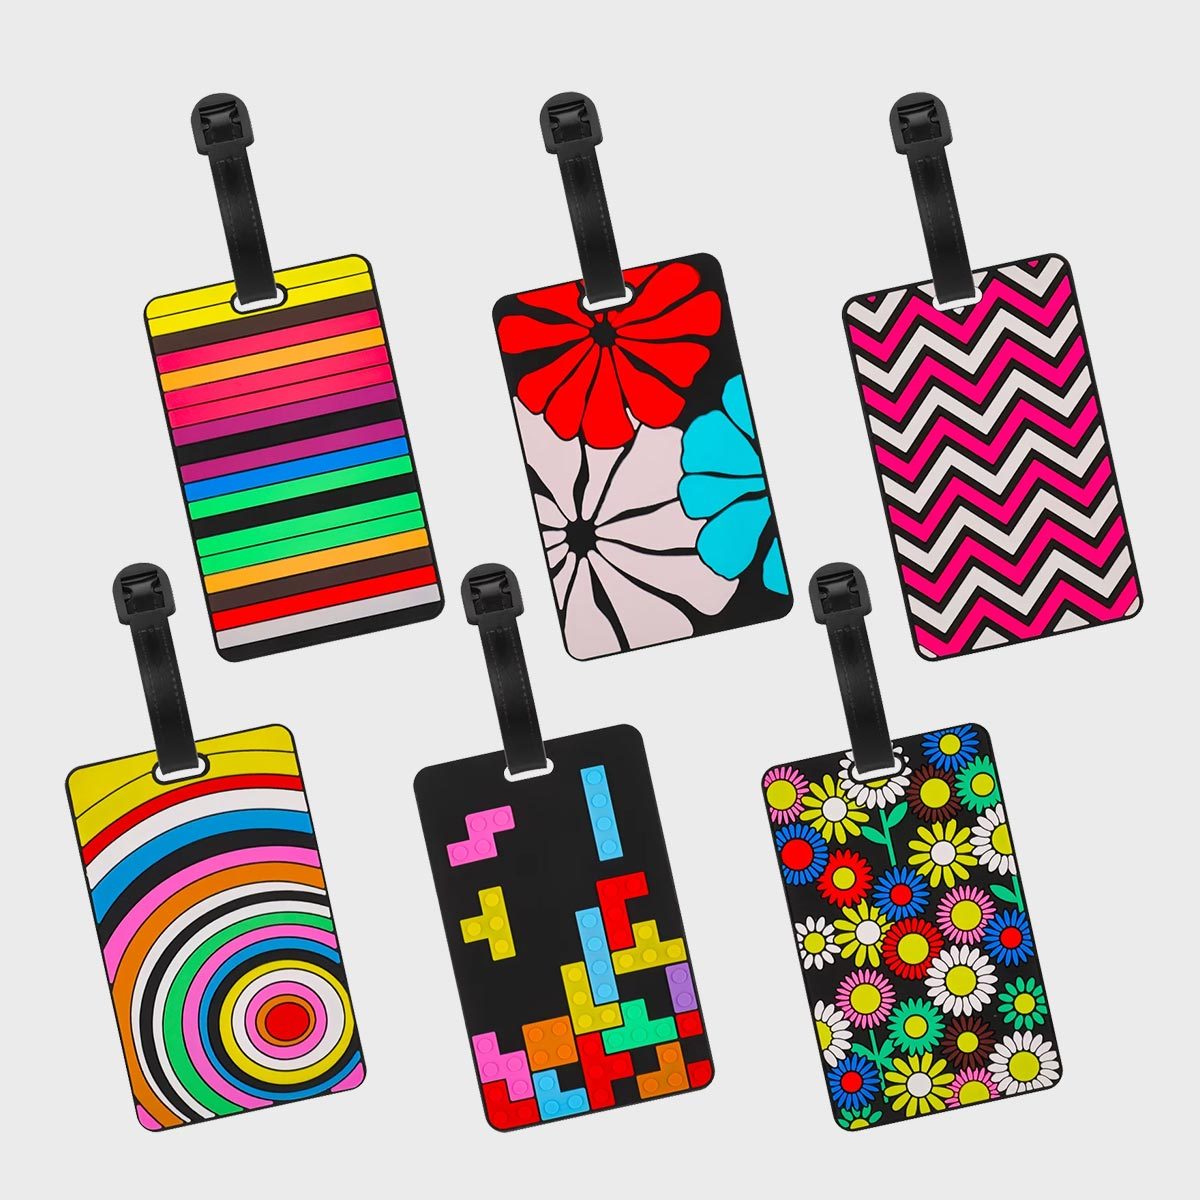 <p>Kids need luggage tags, too! <a href="https://www.walmart.com/ip/Taihexin-Silicone-Luggage-Tag-Set-6-4-13-2-56-inches-Tags-Suitcases-Colorful-Unique-Travel-Baggage-Bag-Name-ID-Card-Perfect-Quickly-Spot-Suitcase/718533831" rel="noopener">Taihexen</a> makes tags that are colorful, fun and definitely easy to spot. The silicone material makes them bendable and durable against the elements or <a href="https://www.rd.com/list/most-dangerous-airports-in-the-world/">rough handling</a> at the airport.</p> <p class="listicle-page__cta-button-shop"><a class="shop-btn" href="https://www.walmart.com/ip/Taihexin-Silicone-Luggage-Tag-Set-6-4-13-2-56-inches-Tags-Suitcases-Colorful-Unique-Travel-Baggage-Bag-Name-ID-Card-Perfect-Quickly-Spot-Suitcase/718533831">Shop Now</a></p>